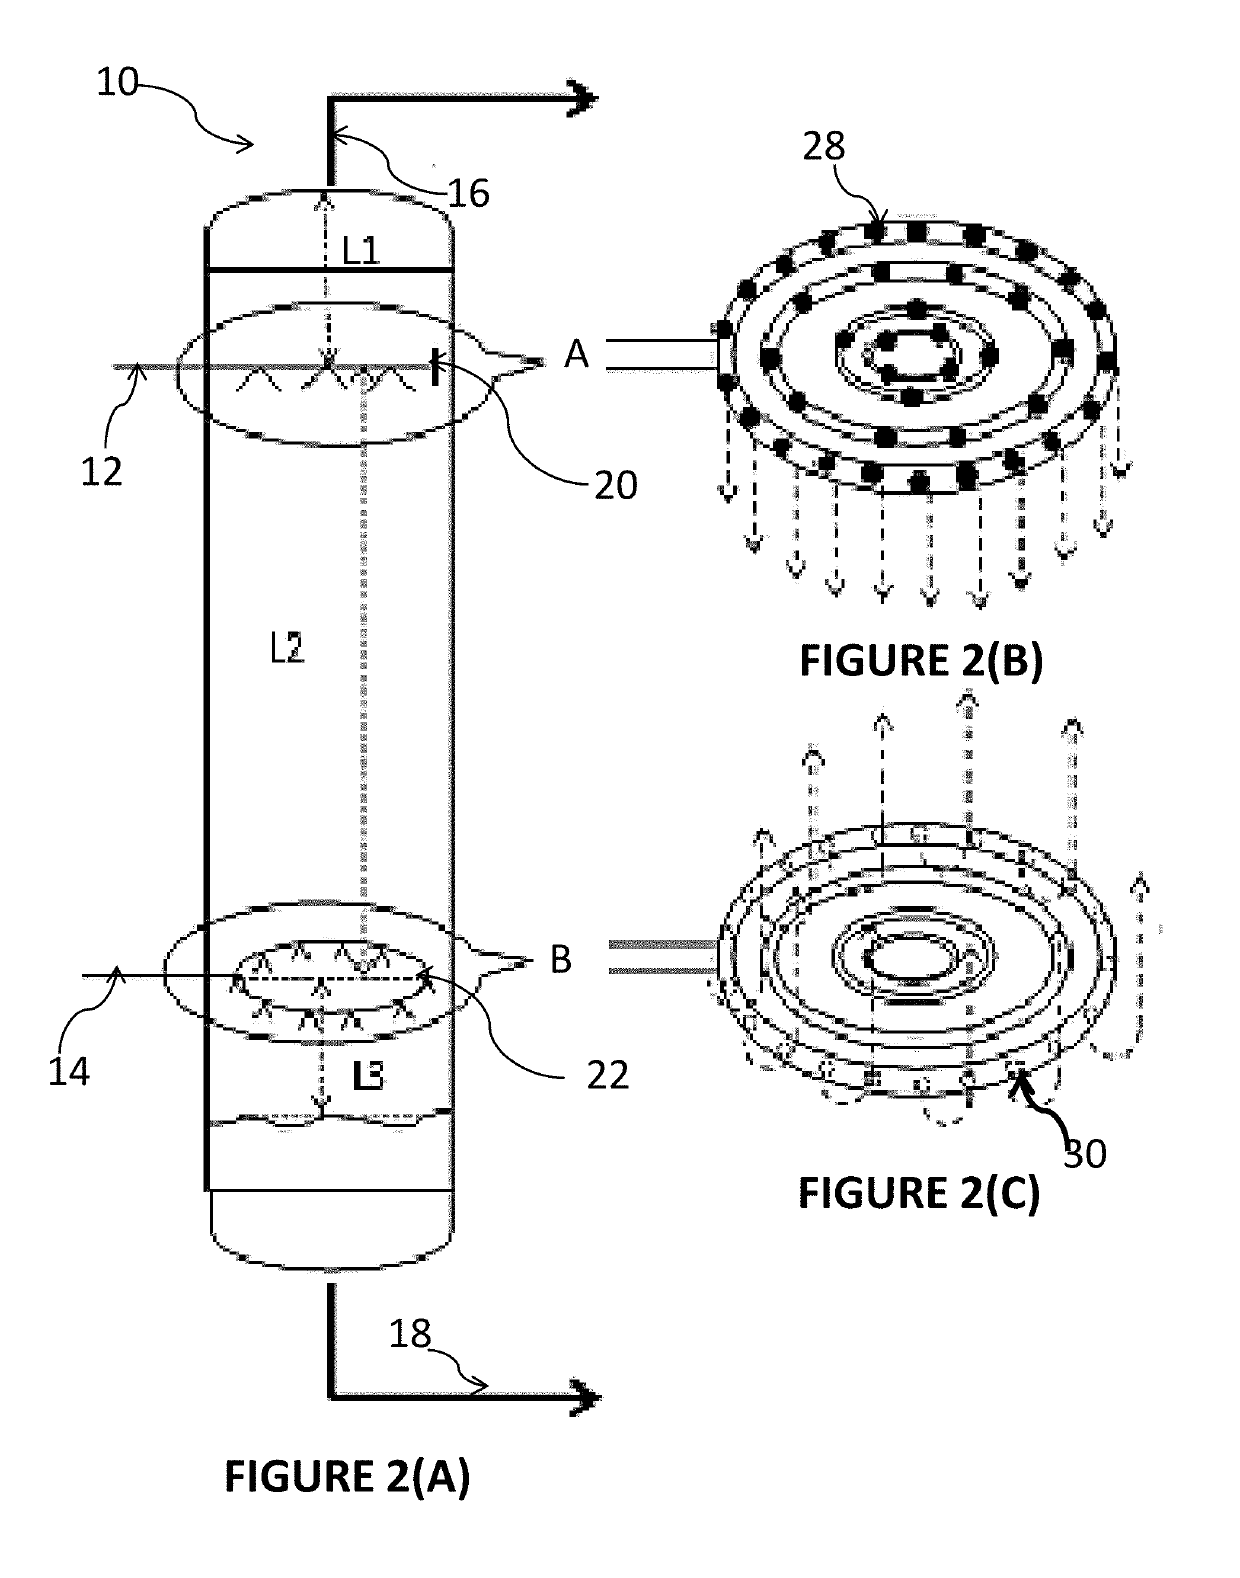 Reactor system and process for upgrading heavy hydrocarbonaceous material